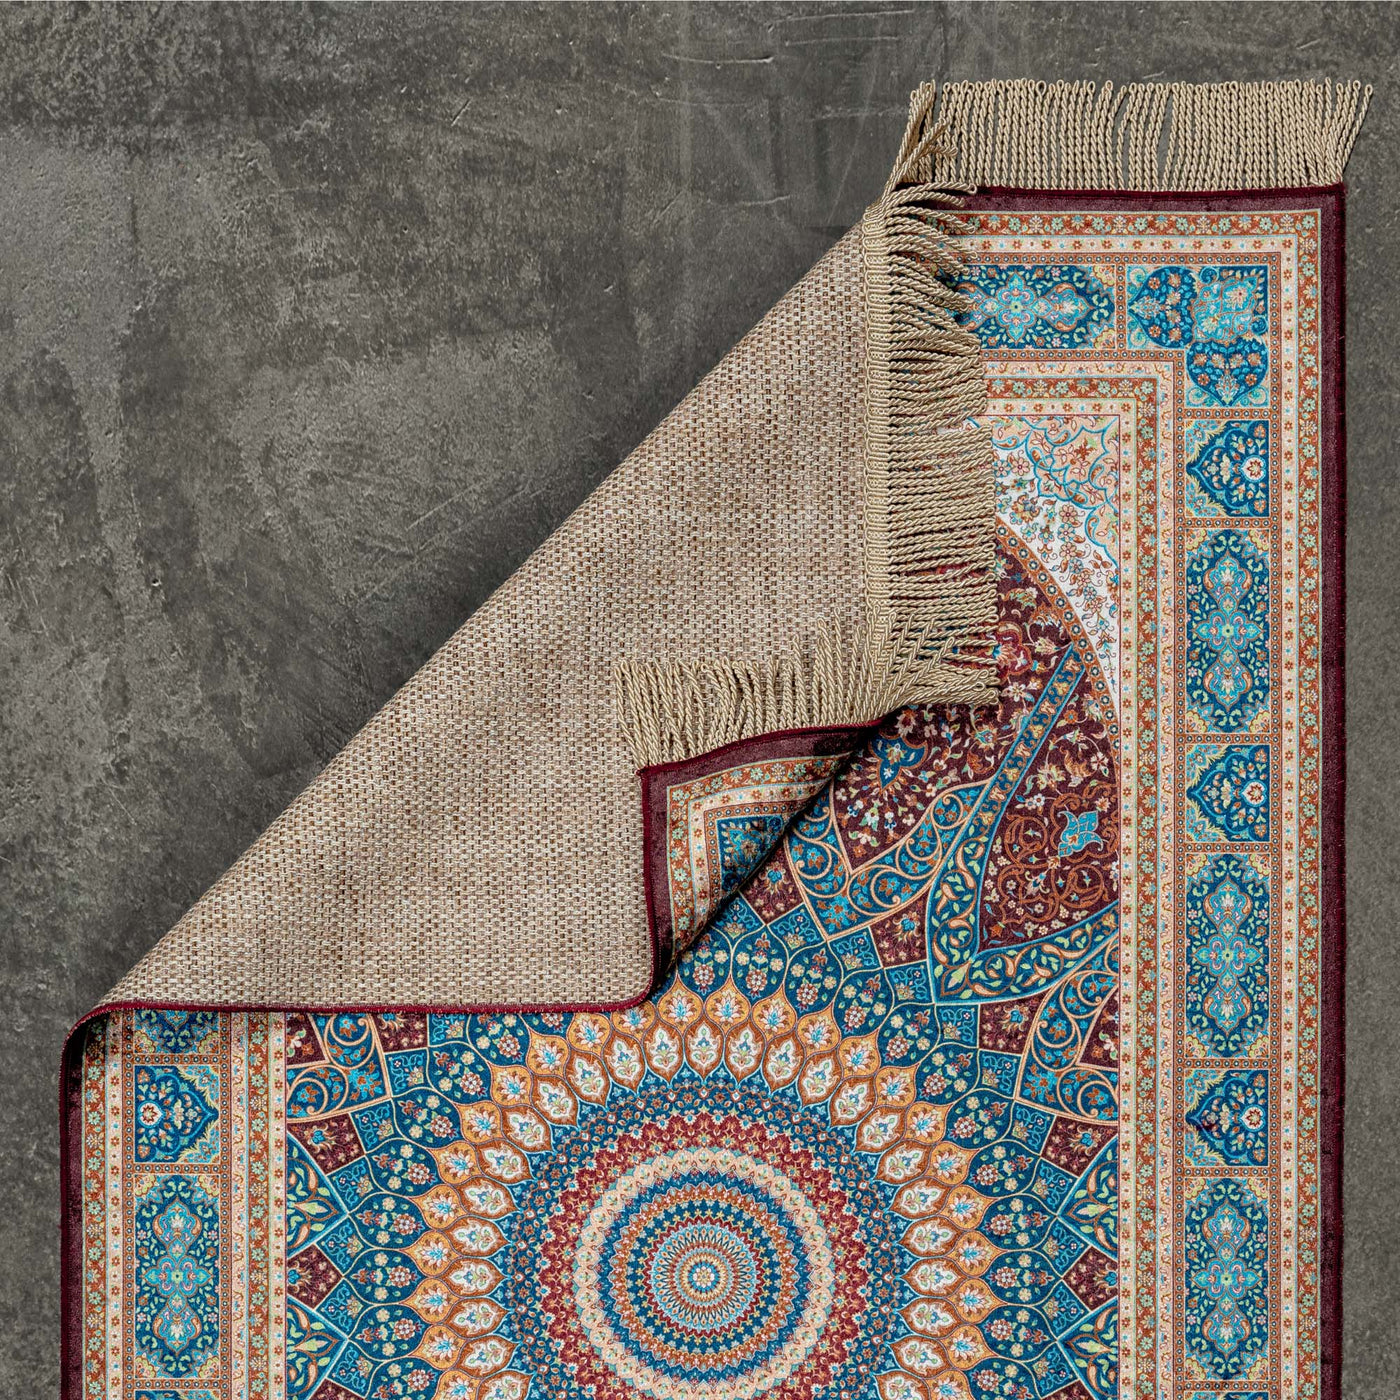 Premium Casual Prayer Rug is a high-end quality Prayer Rug from Seven Sajada. The Premium Casual Prayer Rug has a very beautiful detailed pattern.